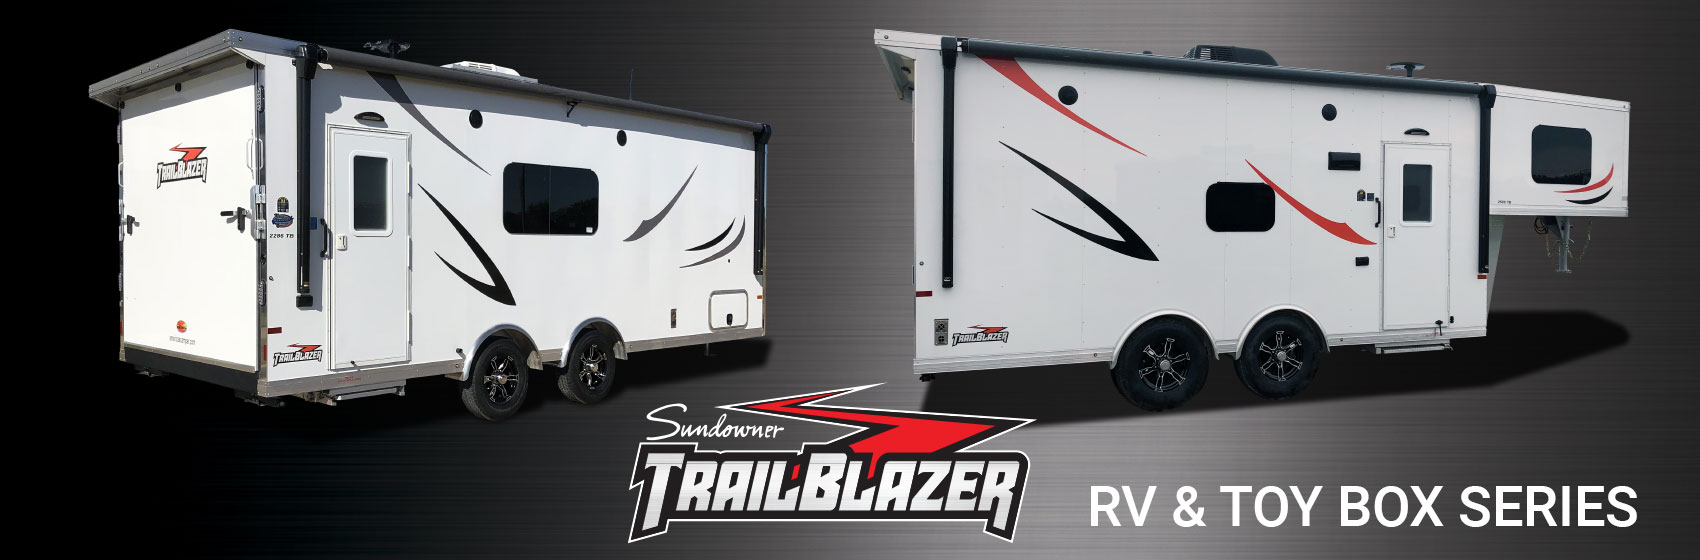 RV and Toy Box Trailers Image